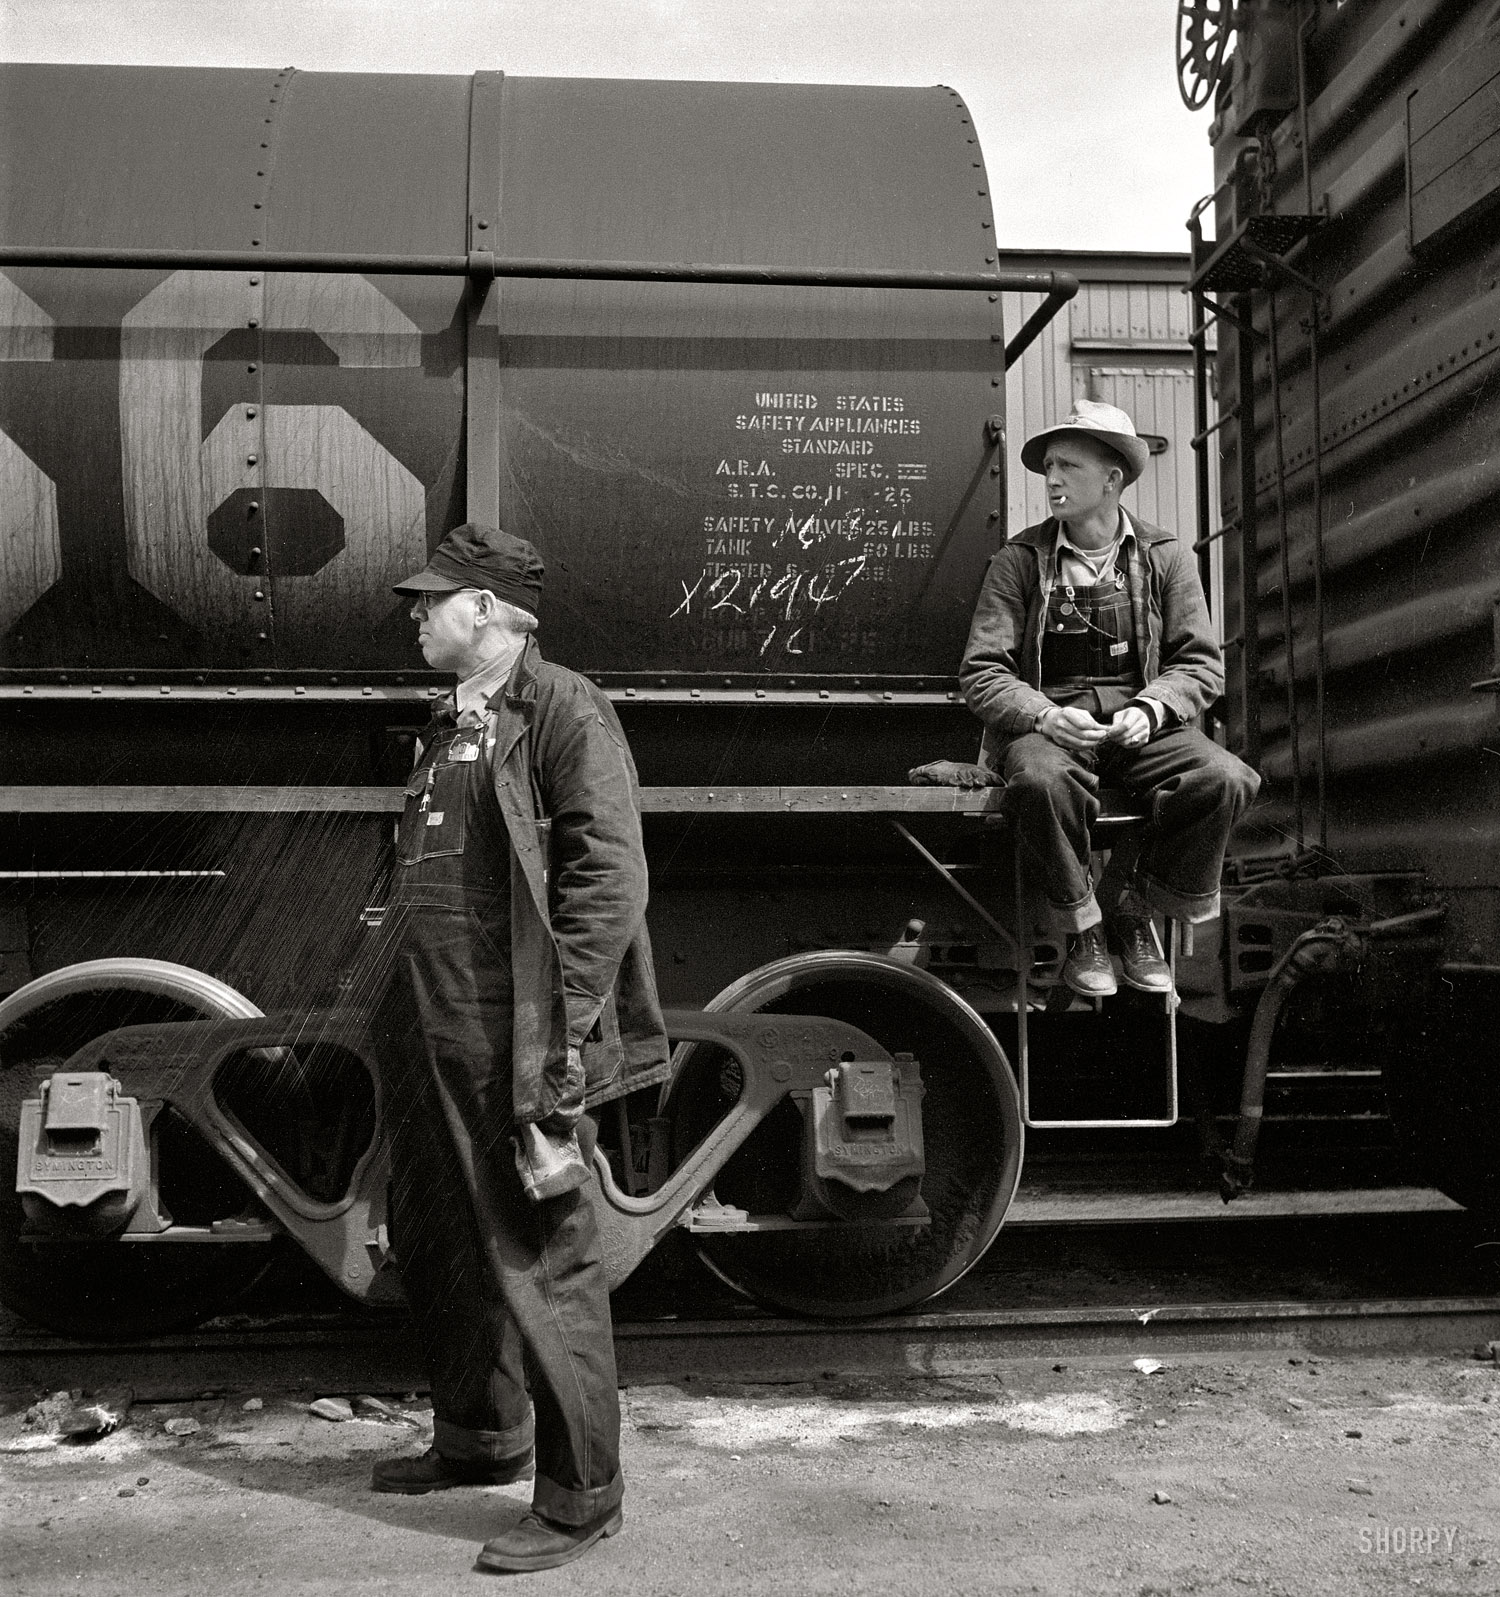 March 1943. Barstow, California. "Head brakeman J.C. Shannon (left) and swing brakeman B.E. Wilson waiting for their train to pull out of the Atchison, Topeka and Santa Fe yard." Nitrate negative by Jack Delano. View full size.